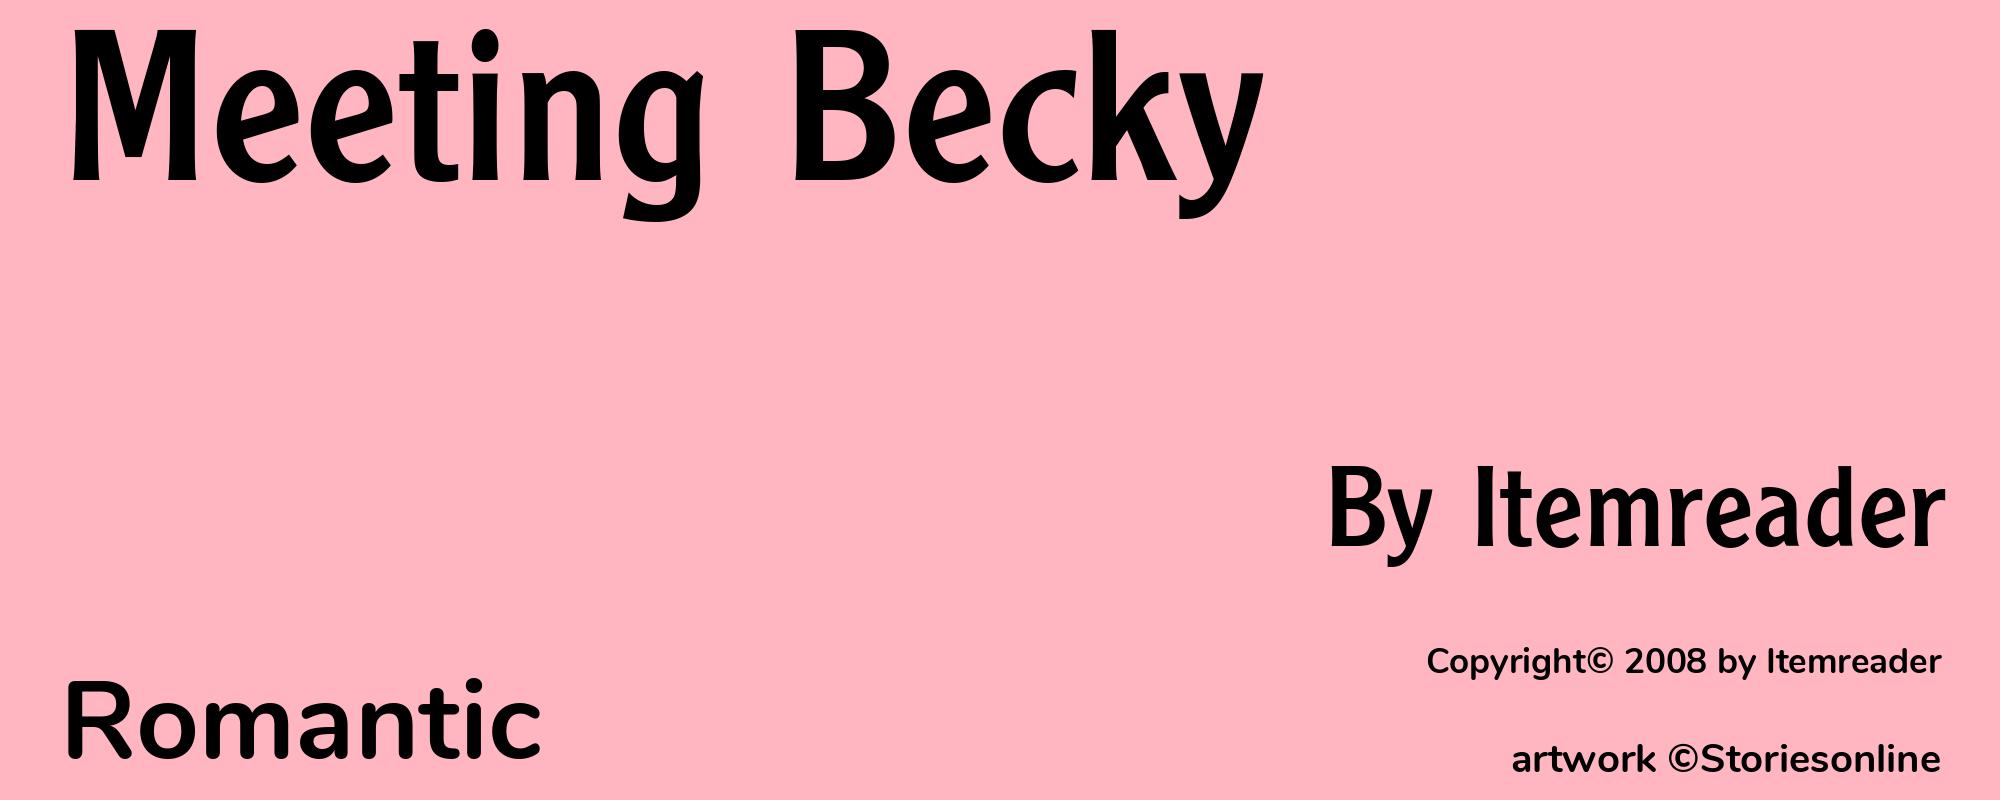 Meeting Becky - Cover